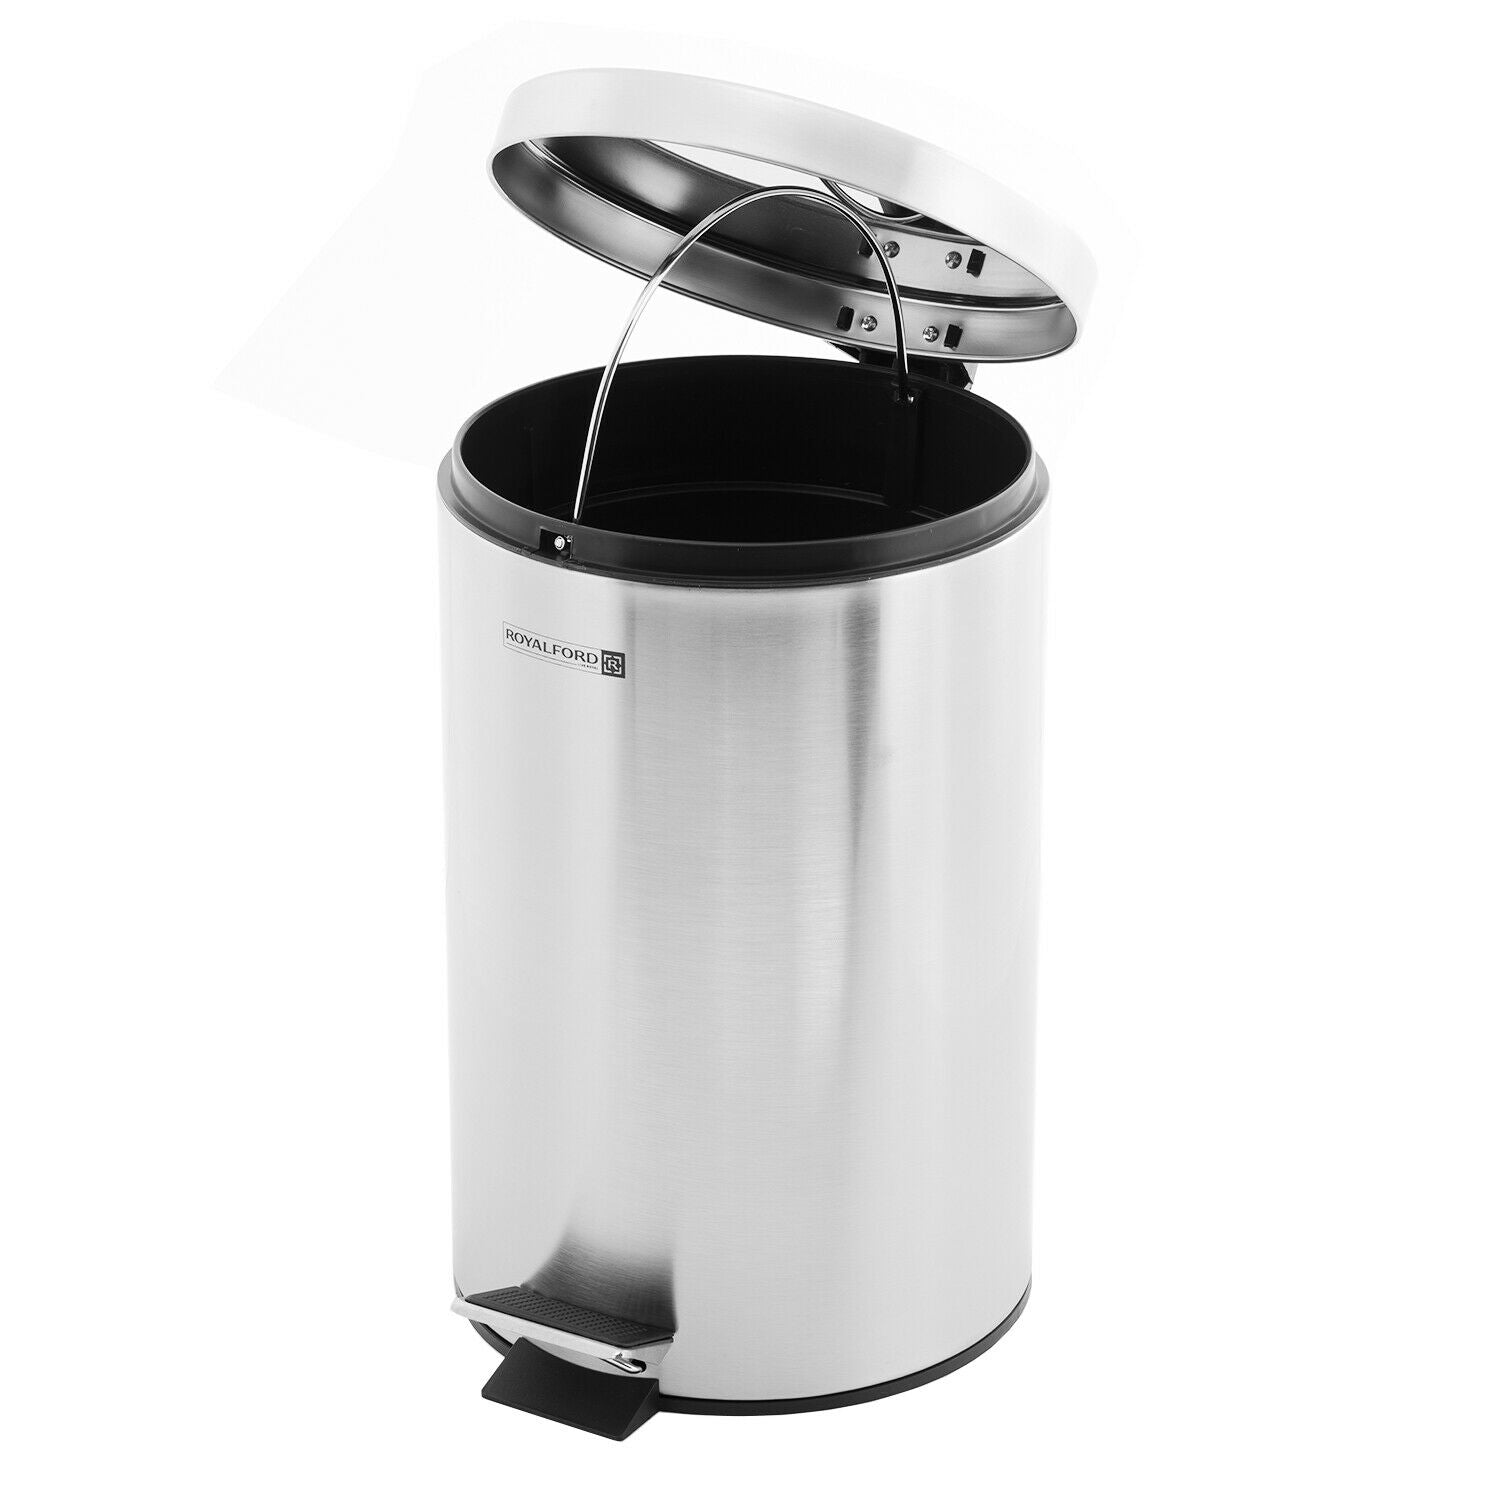 Stainless Steel Waste Dustbin Royalford 